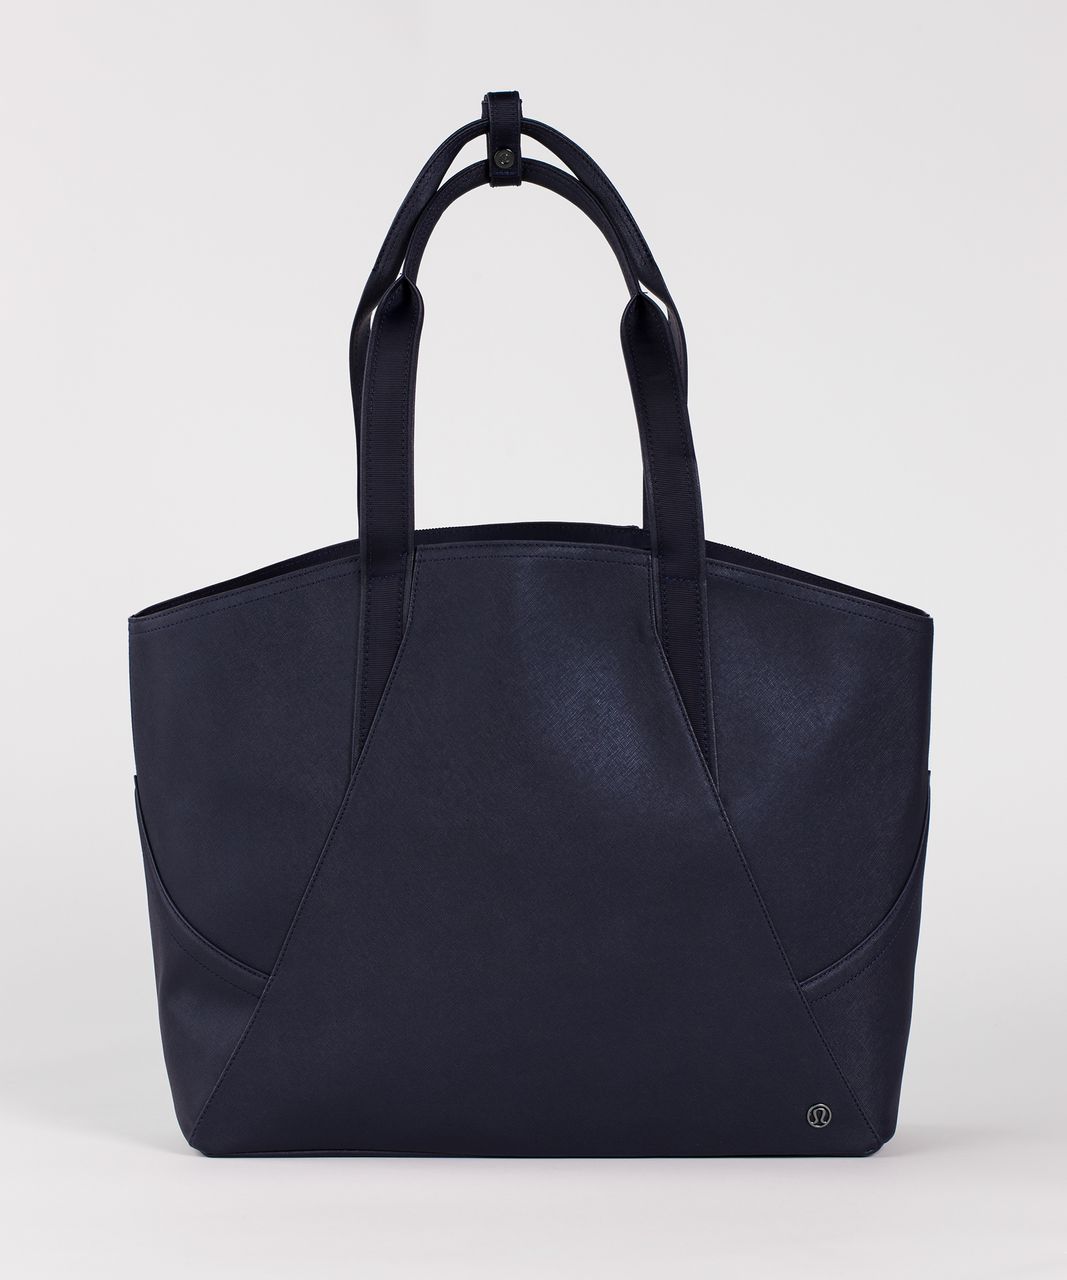 Lululemon All Day Tote (26L) - Midnight Navy